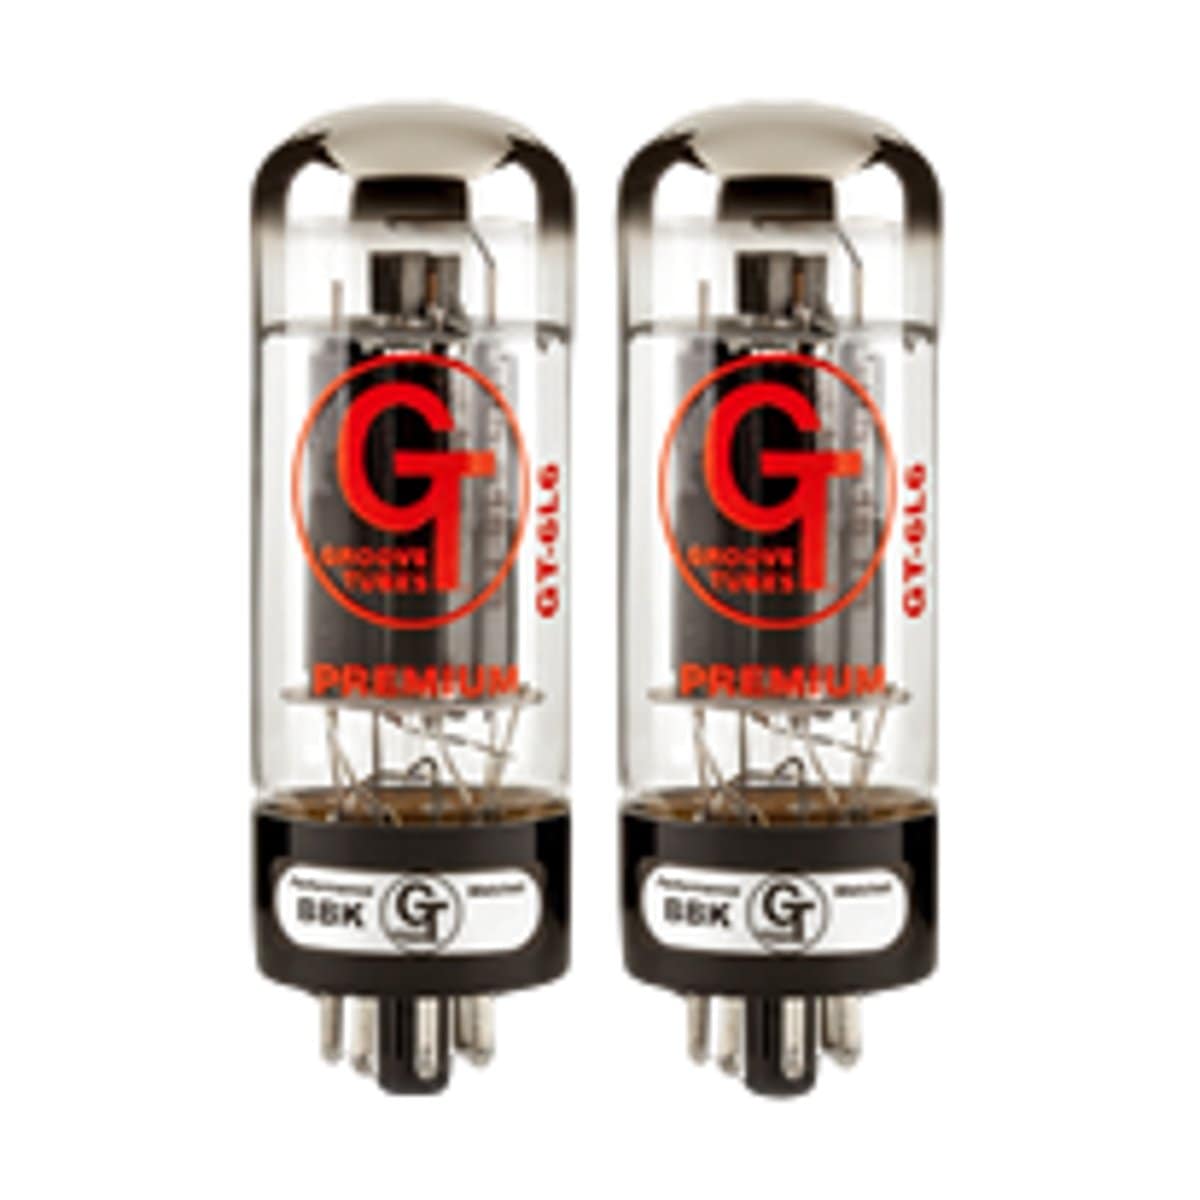 Groove Tubes Guitar Accessories Groove Tubes GT-6L6-S Med Duet 6L6 Tubes Valves Matched Pair - Byron Music